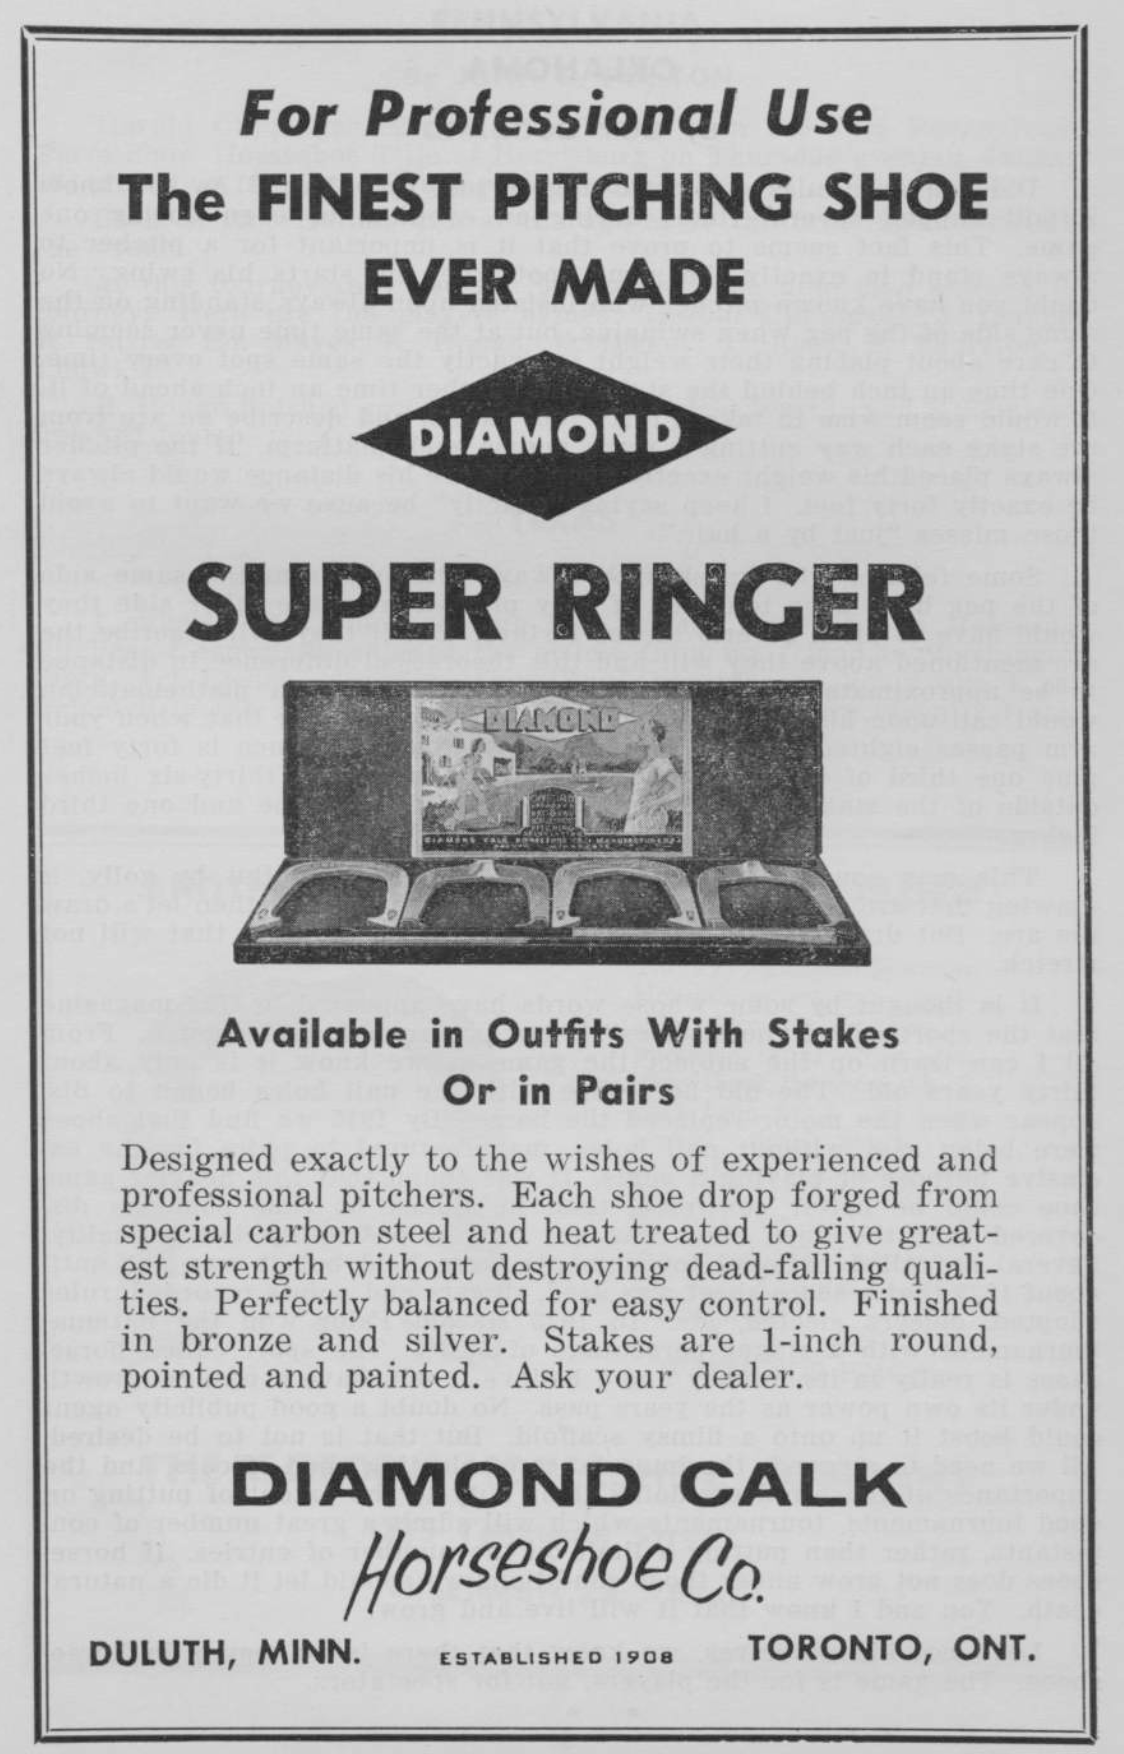 A magazine advertisement for Diamond Super Ringer professional horseshoes promises they are "perfectly balanced for easy control" and available in bronze and silver.